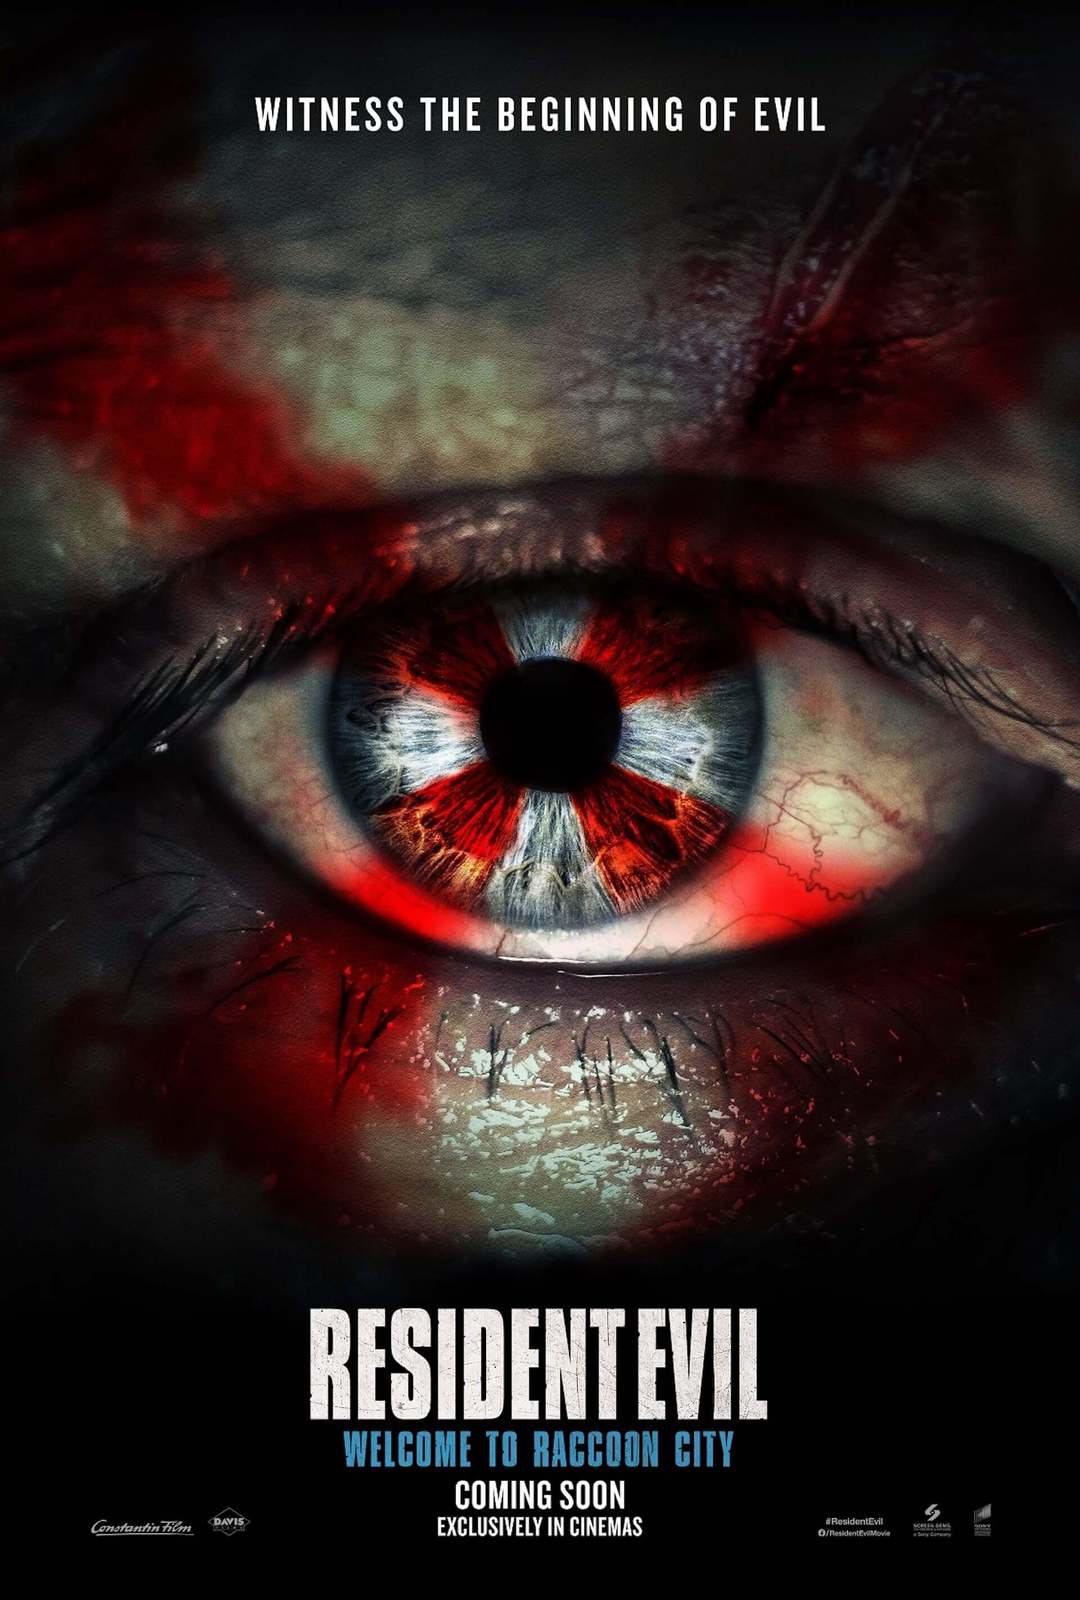 Resident Evil Welcome to Raccoon City Movie Poster Art Film Print 24x36 27x40